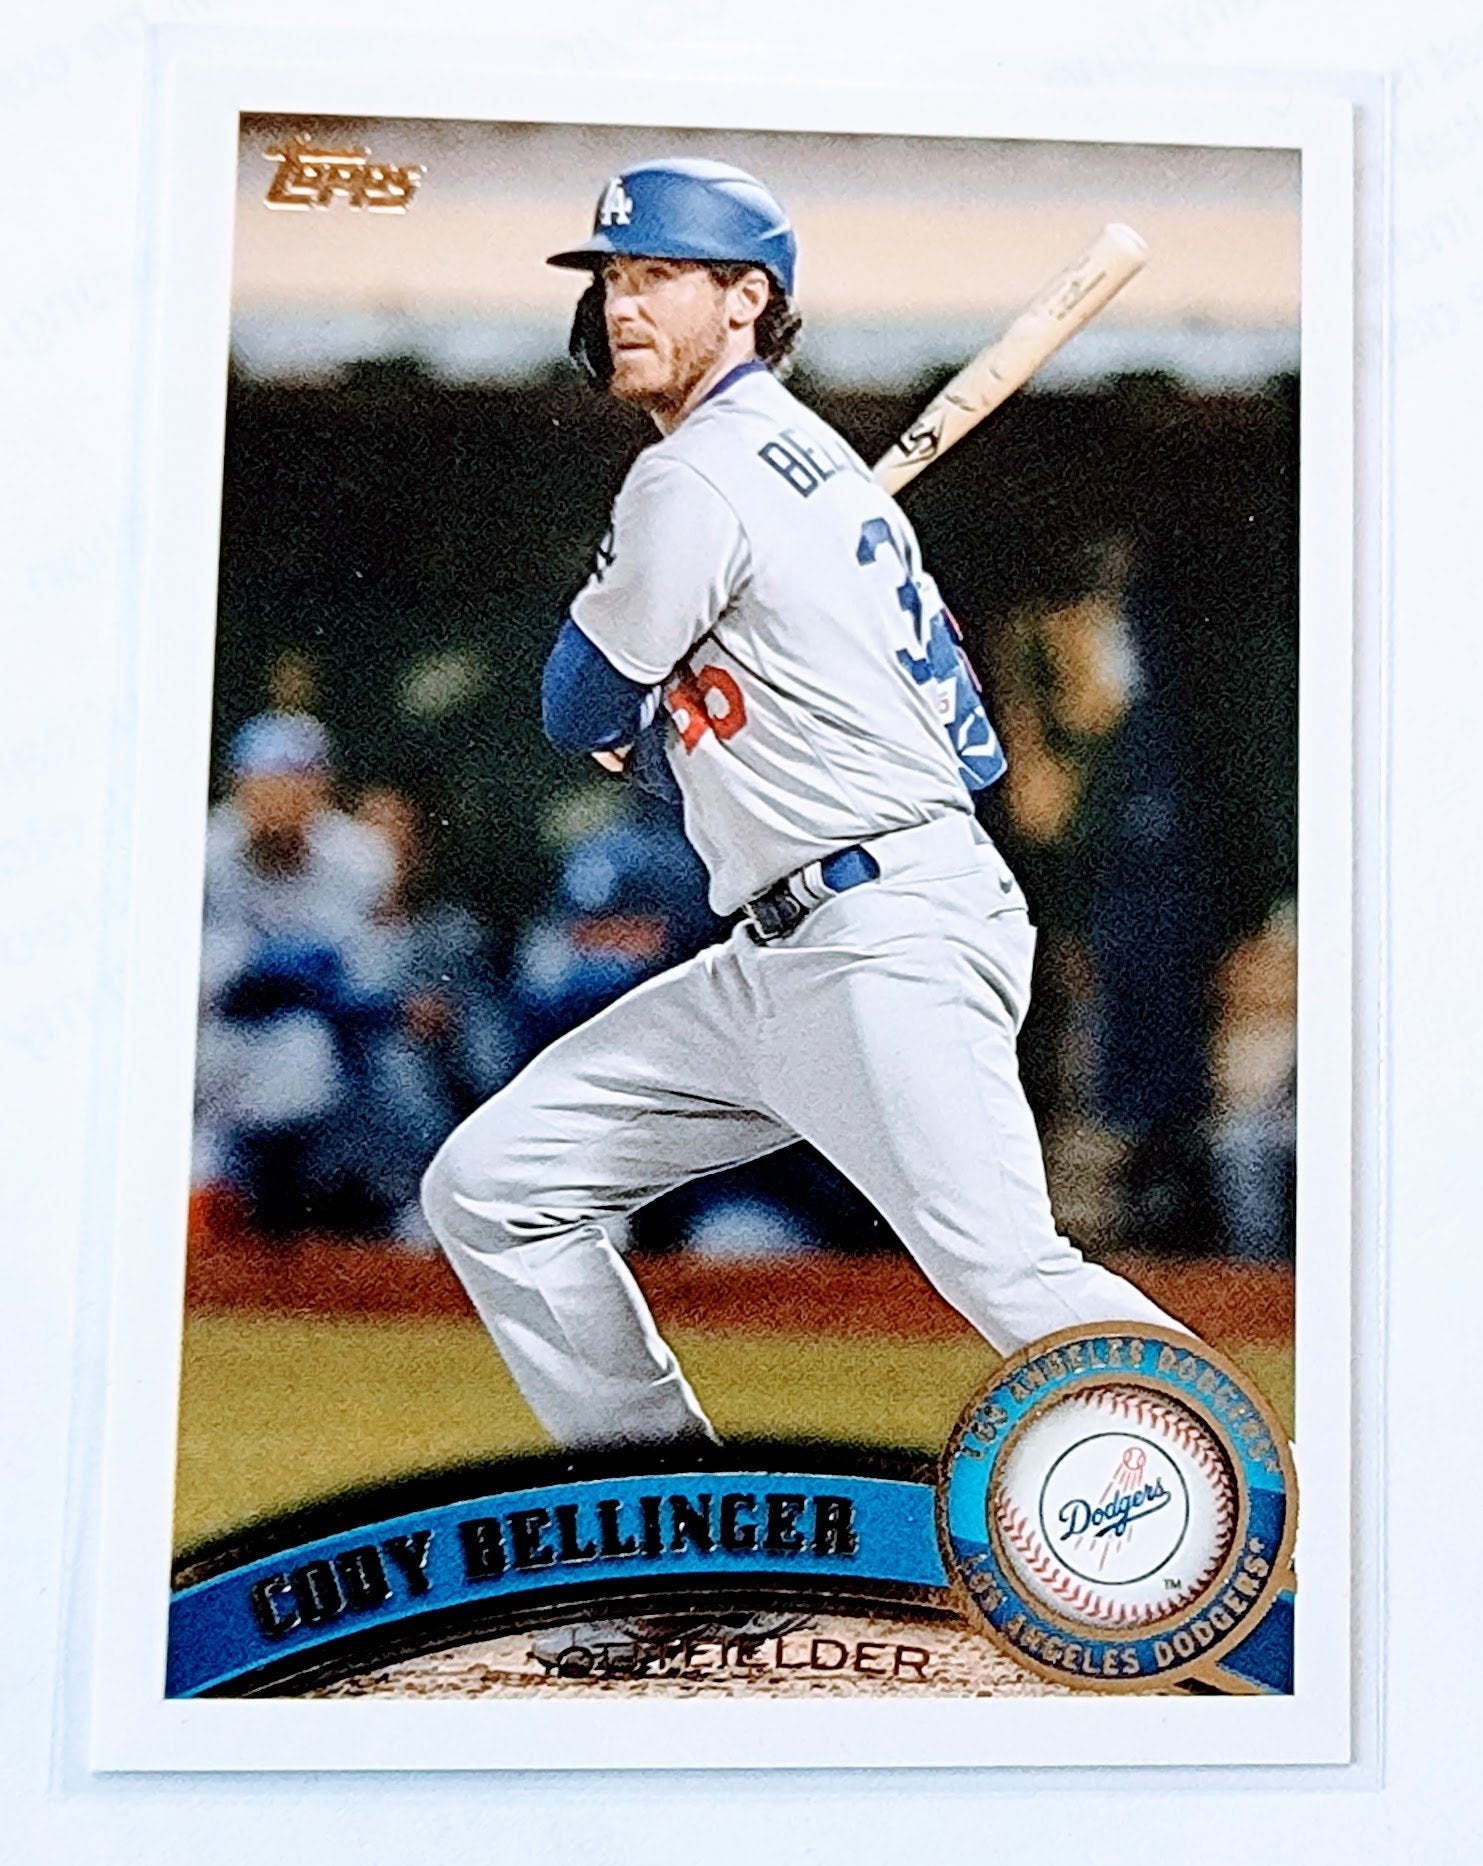 2021 Topps Archives Cody Bellinger 2011 Baseball Trading Card SMCB1 simple Xclusive Collectibles   